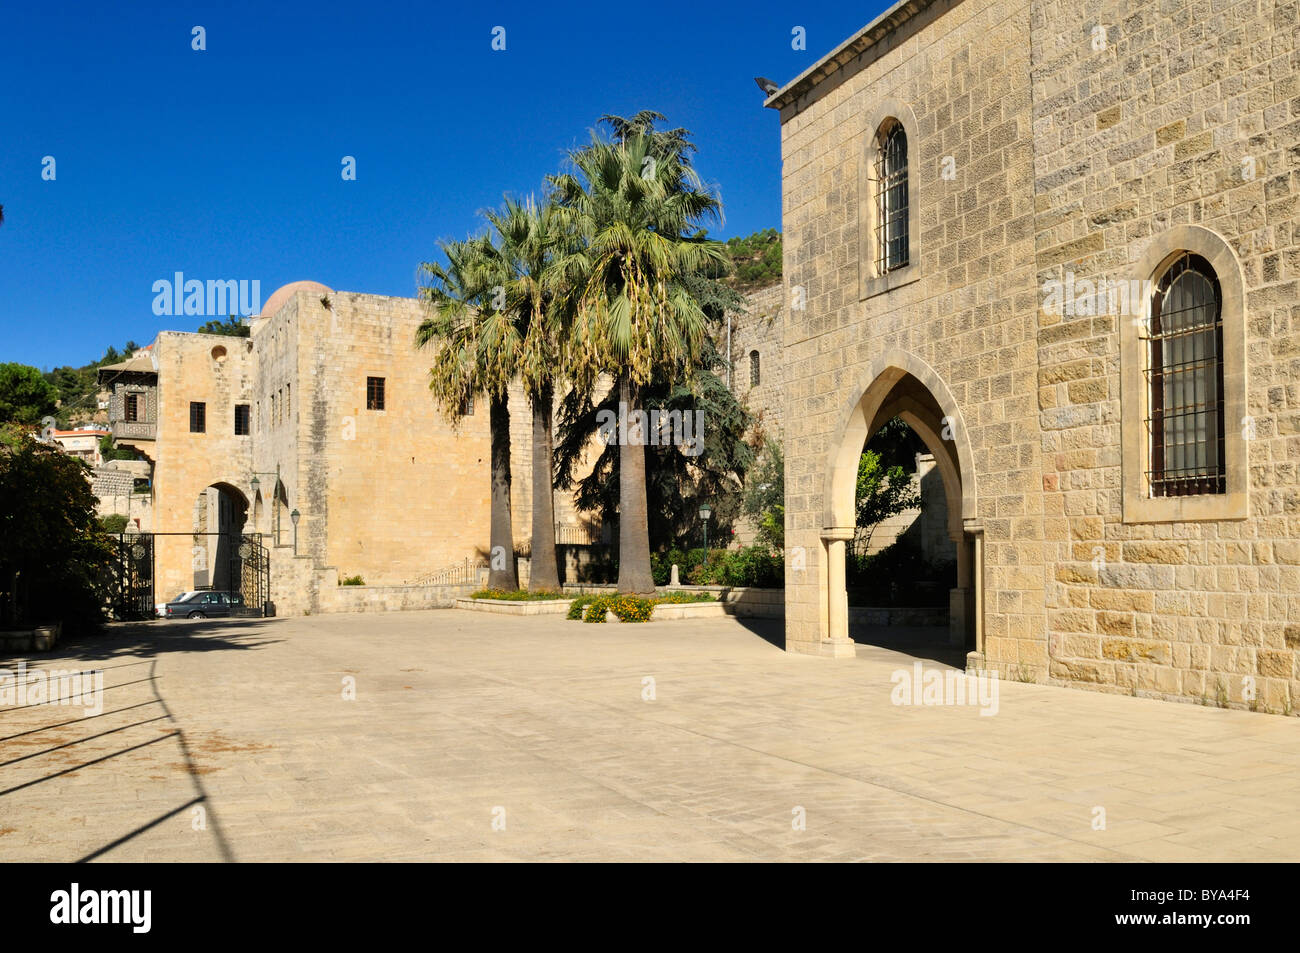 Historic palace in the historic town of Deir el-Qamar, Chouf, Lebanon, Middle East, West Asia Stock Photo